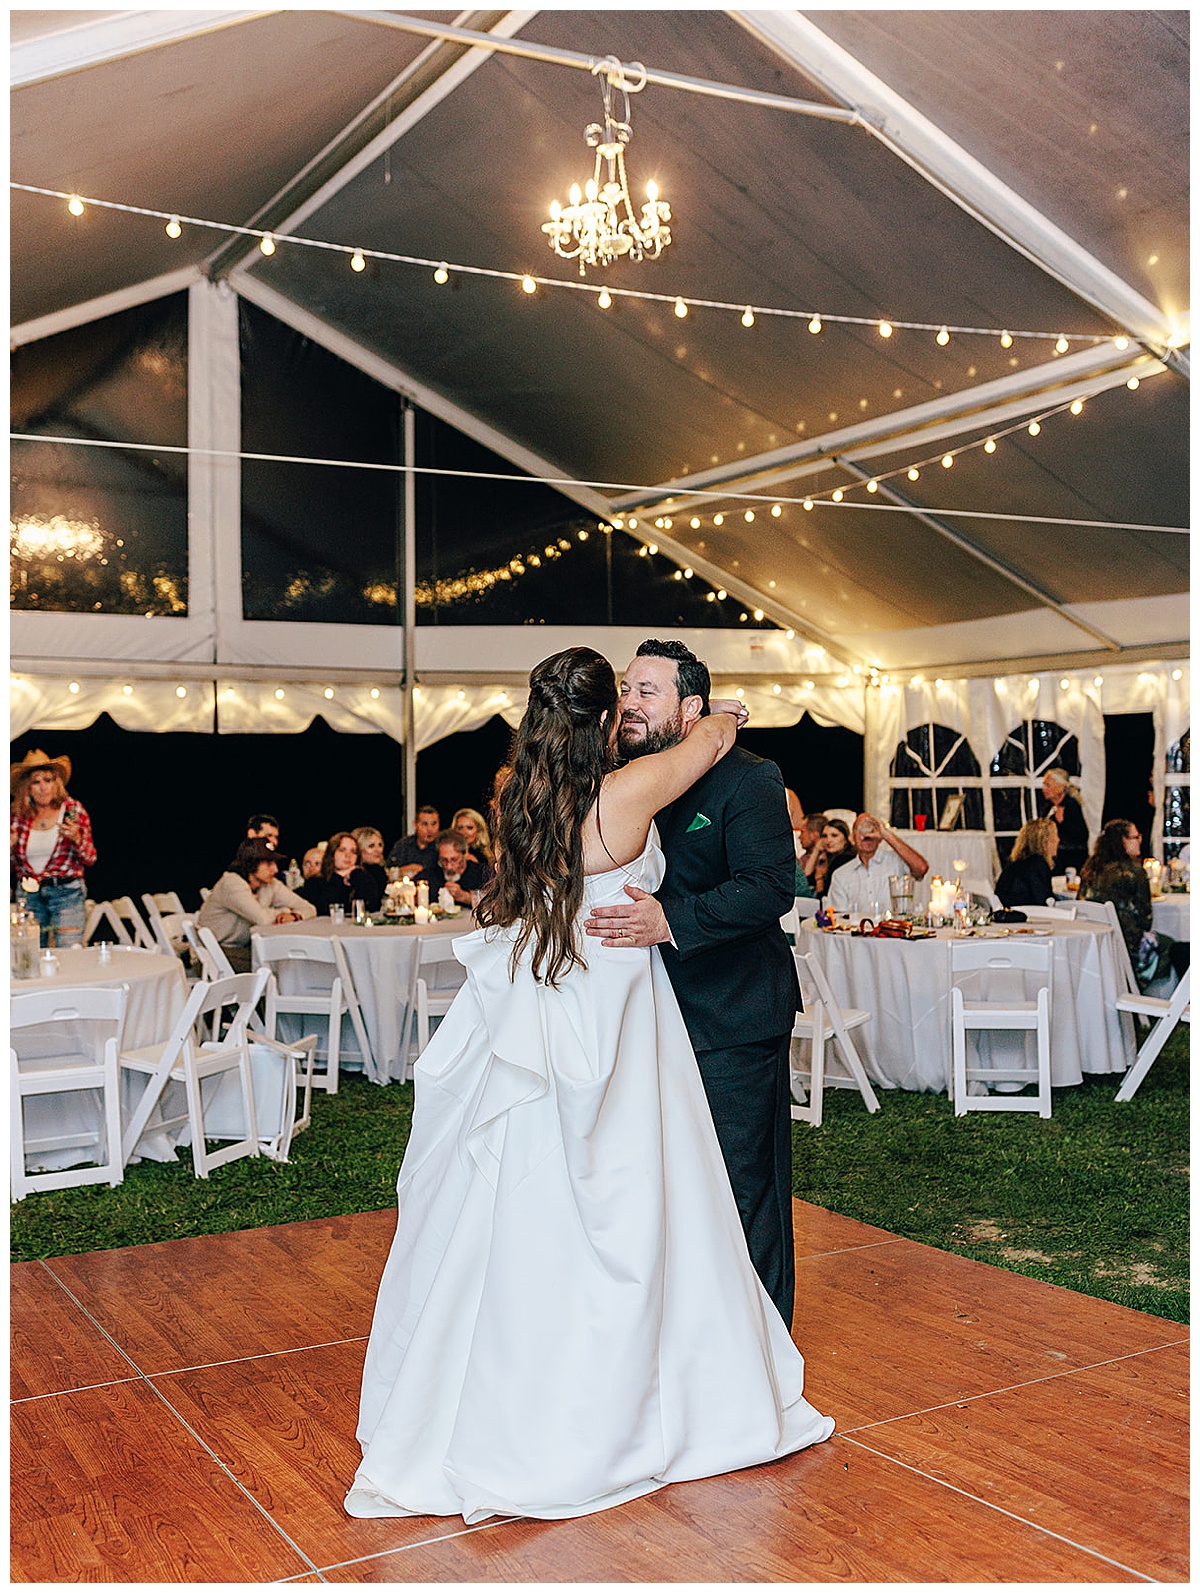 Couple dance together during their intimate backyard wedding